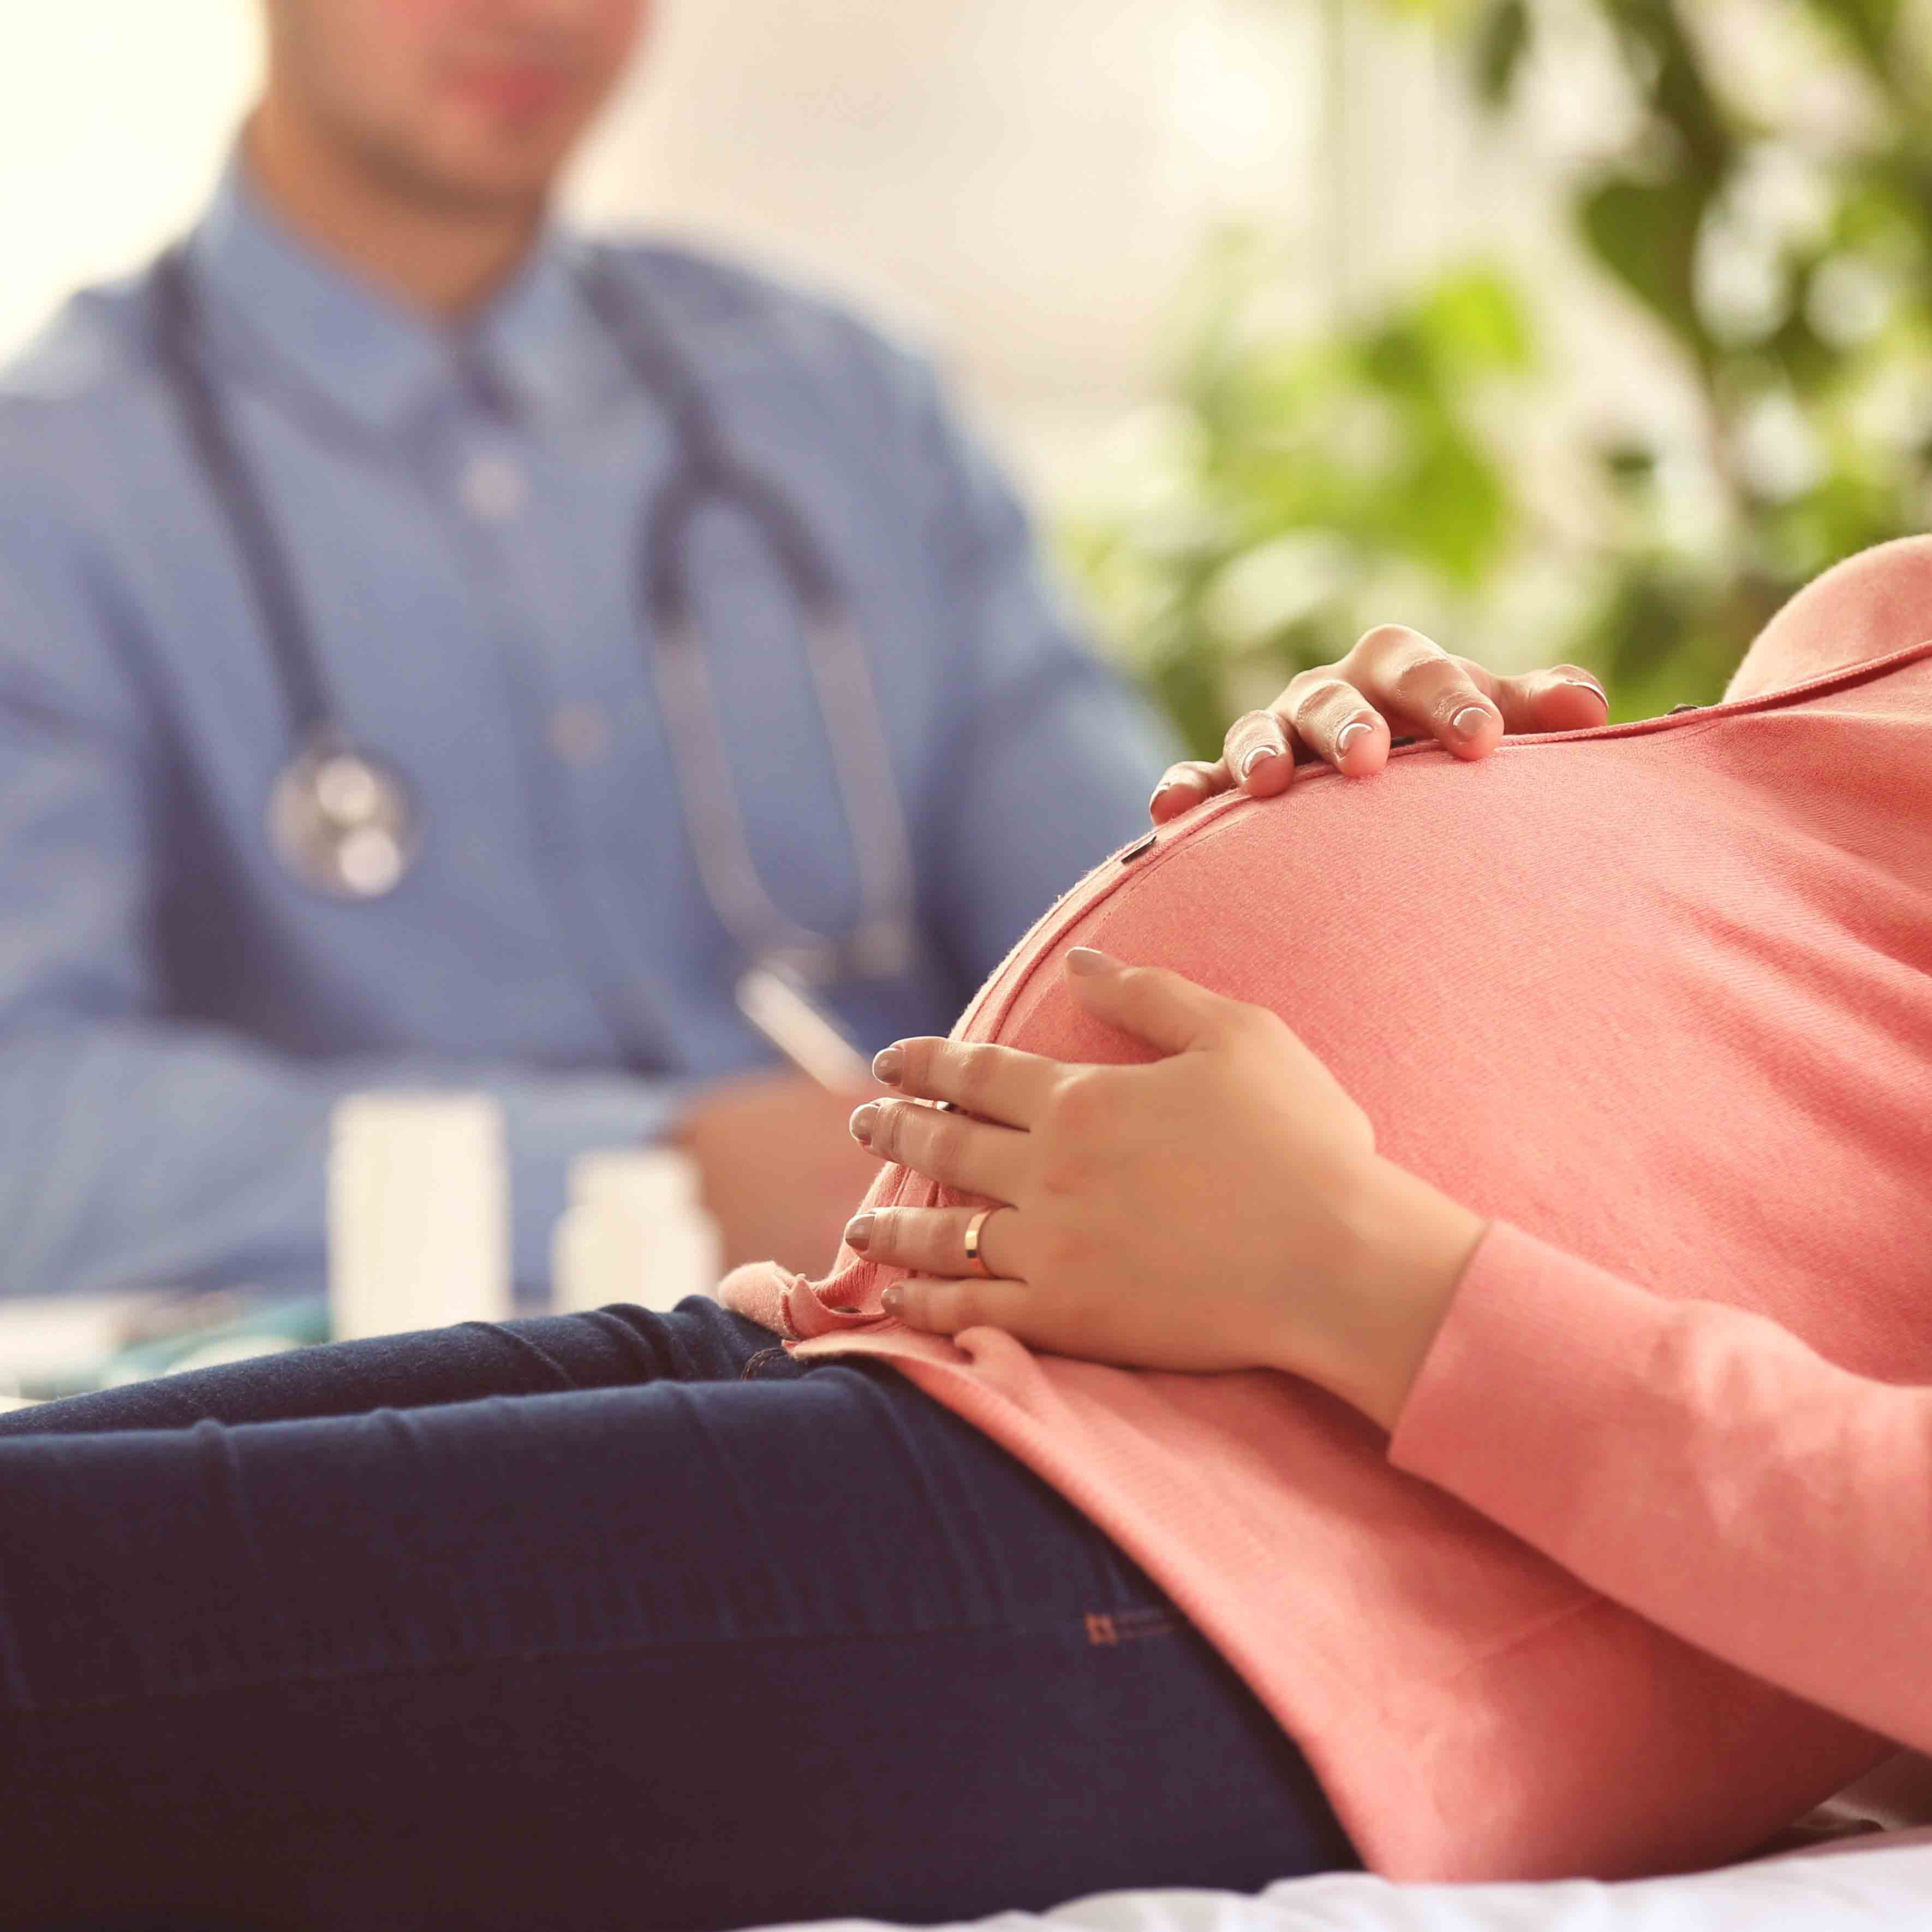 Gynaecology/early pregnancy assessment clinic - Hornsby Hospital